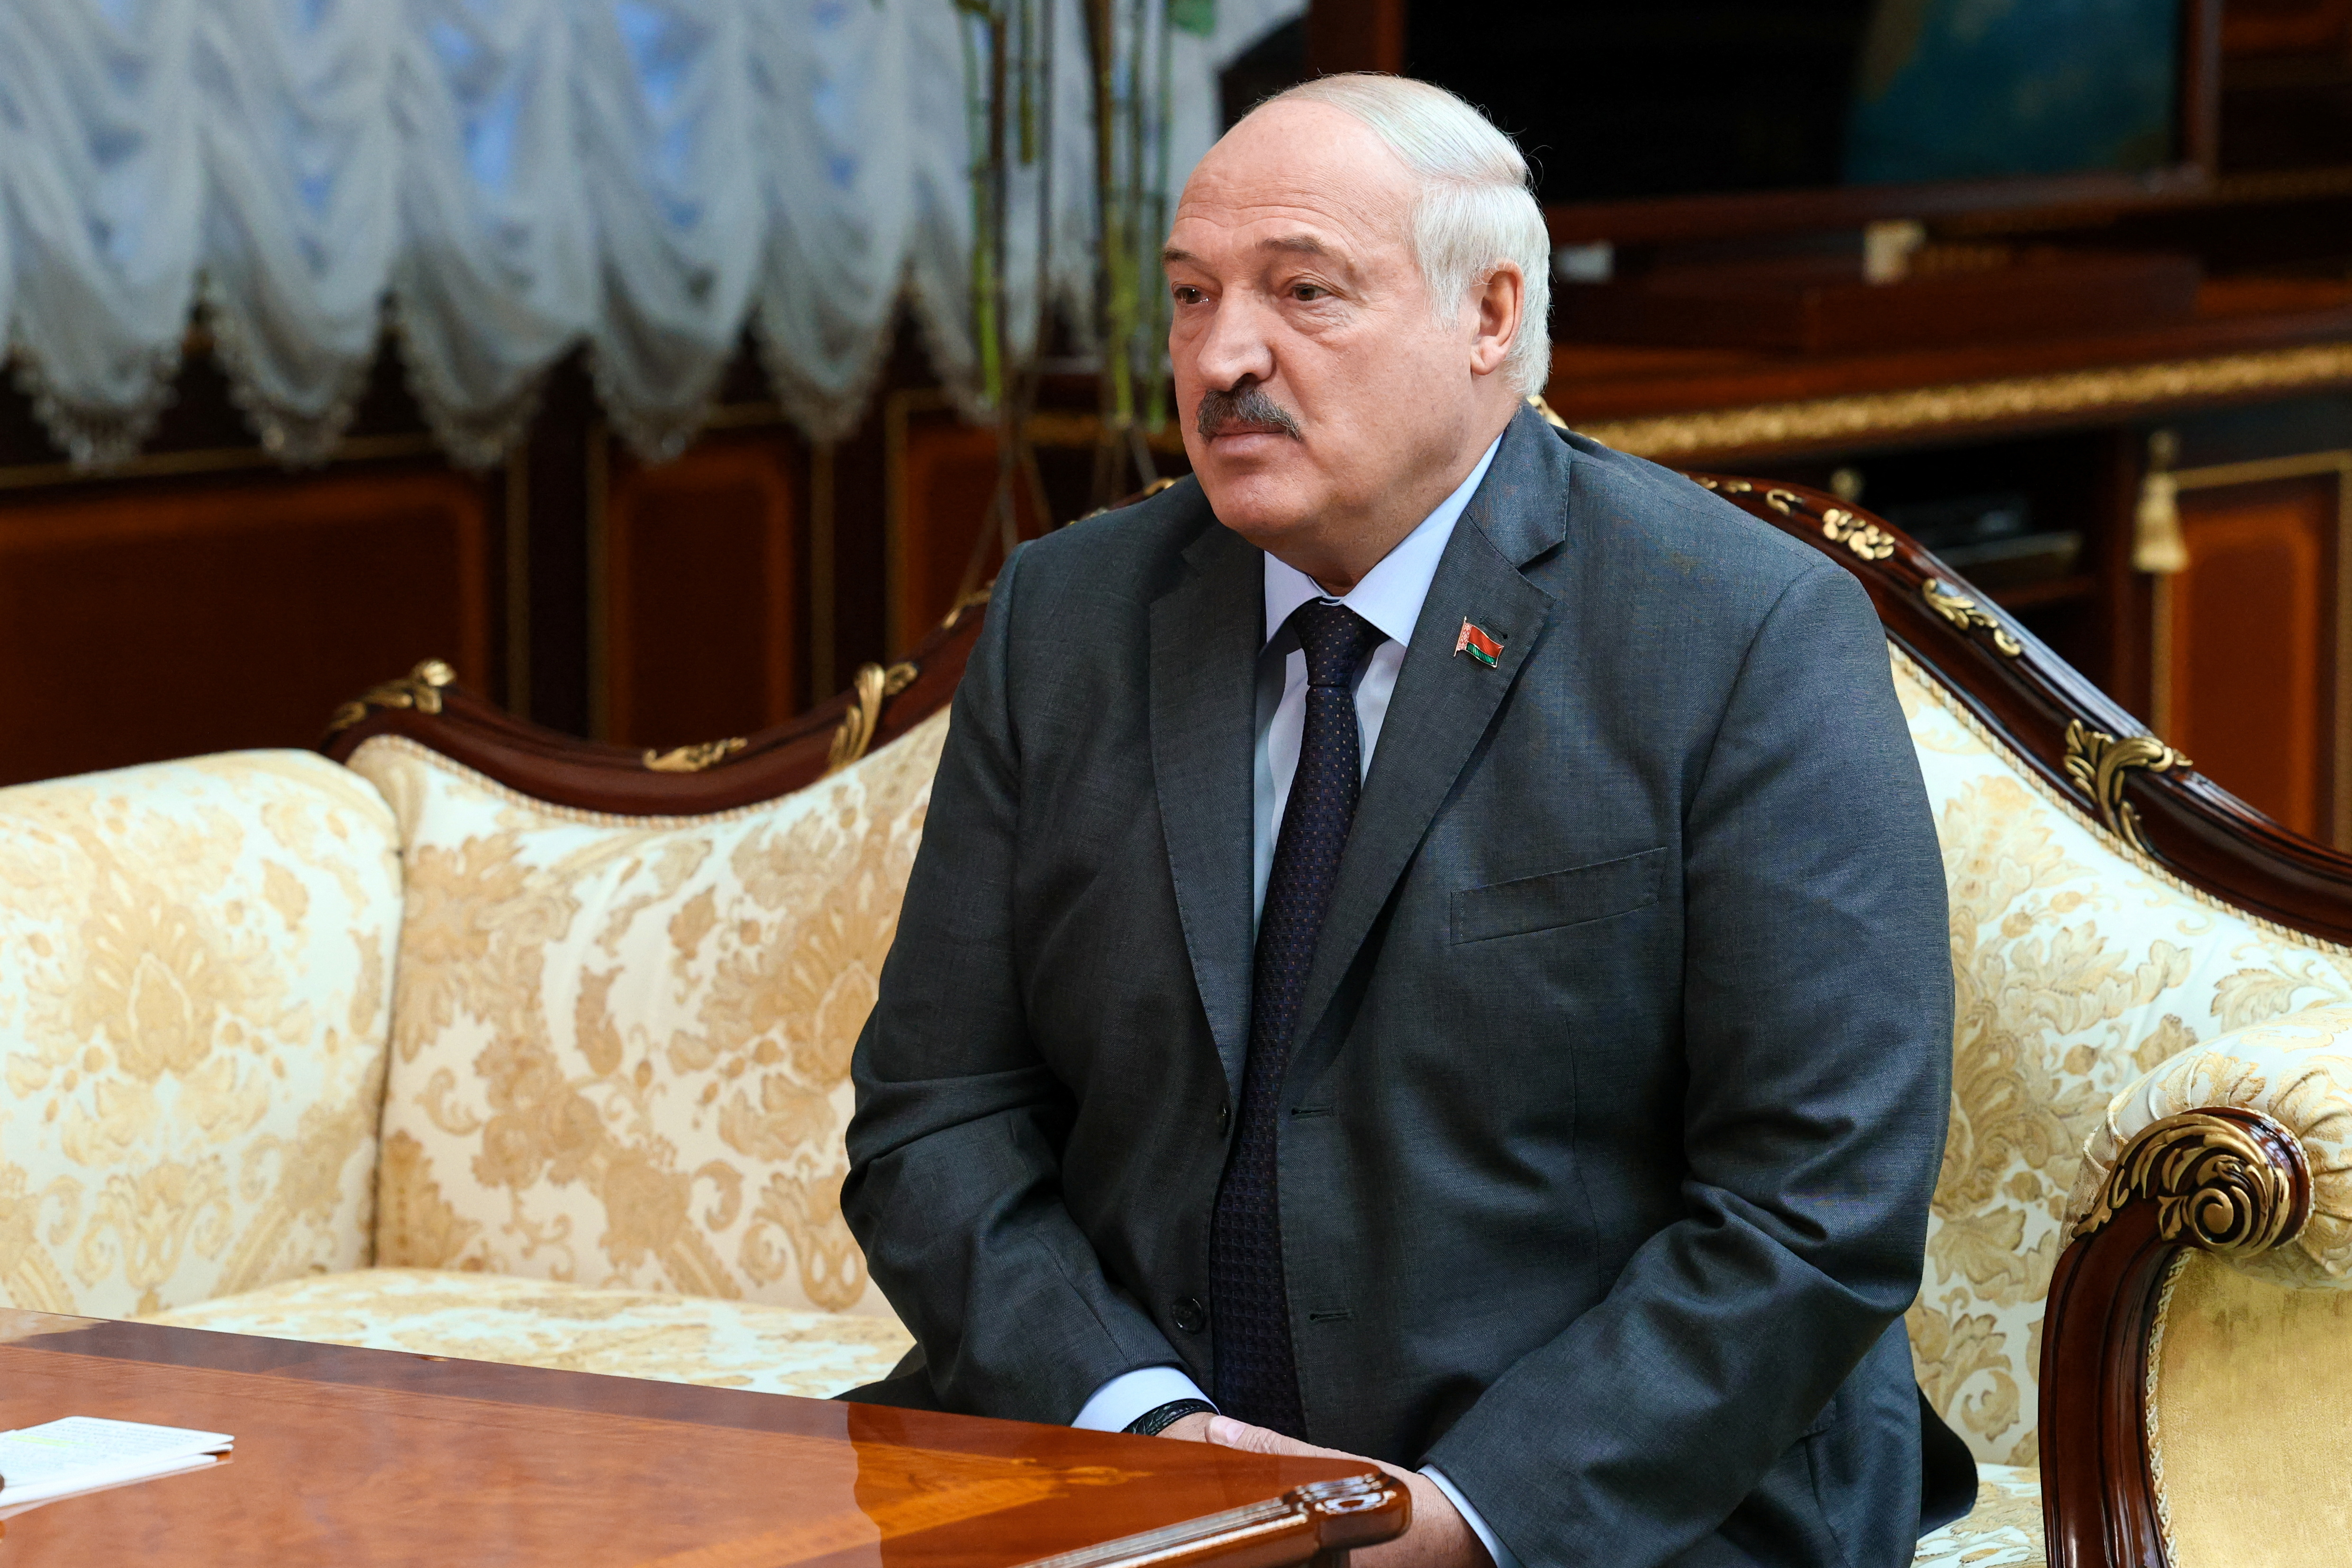 Belarus President Alexander Lukashenko says he will only order his troops to attack Ukraine if they 